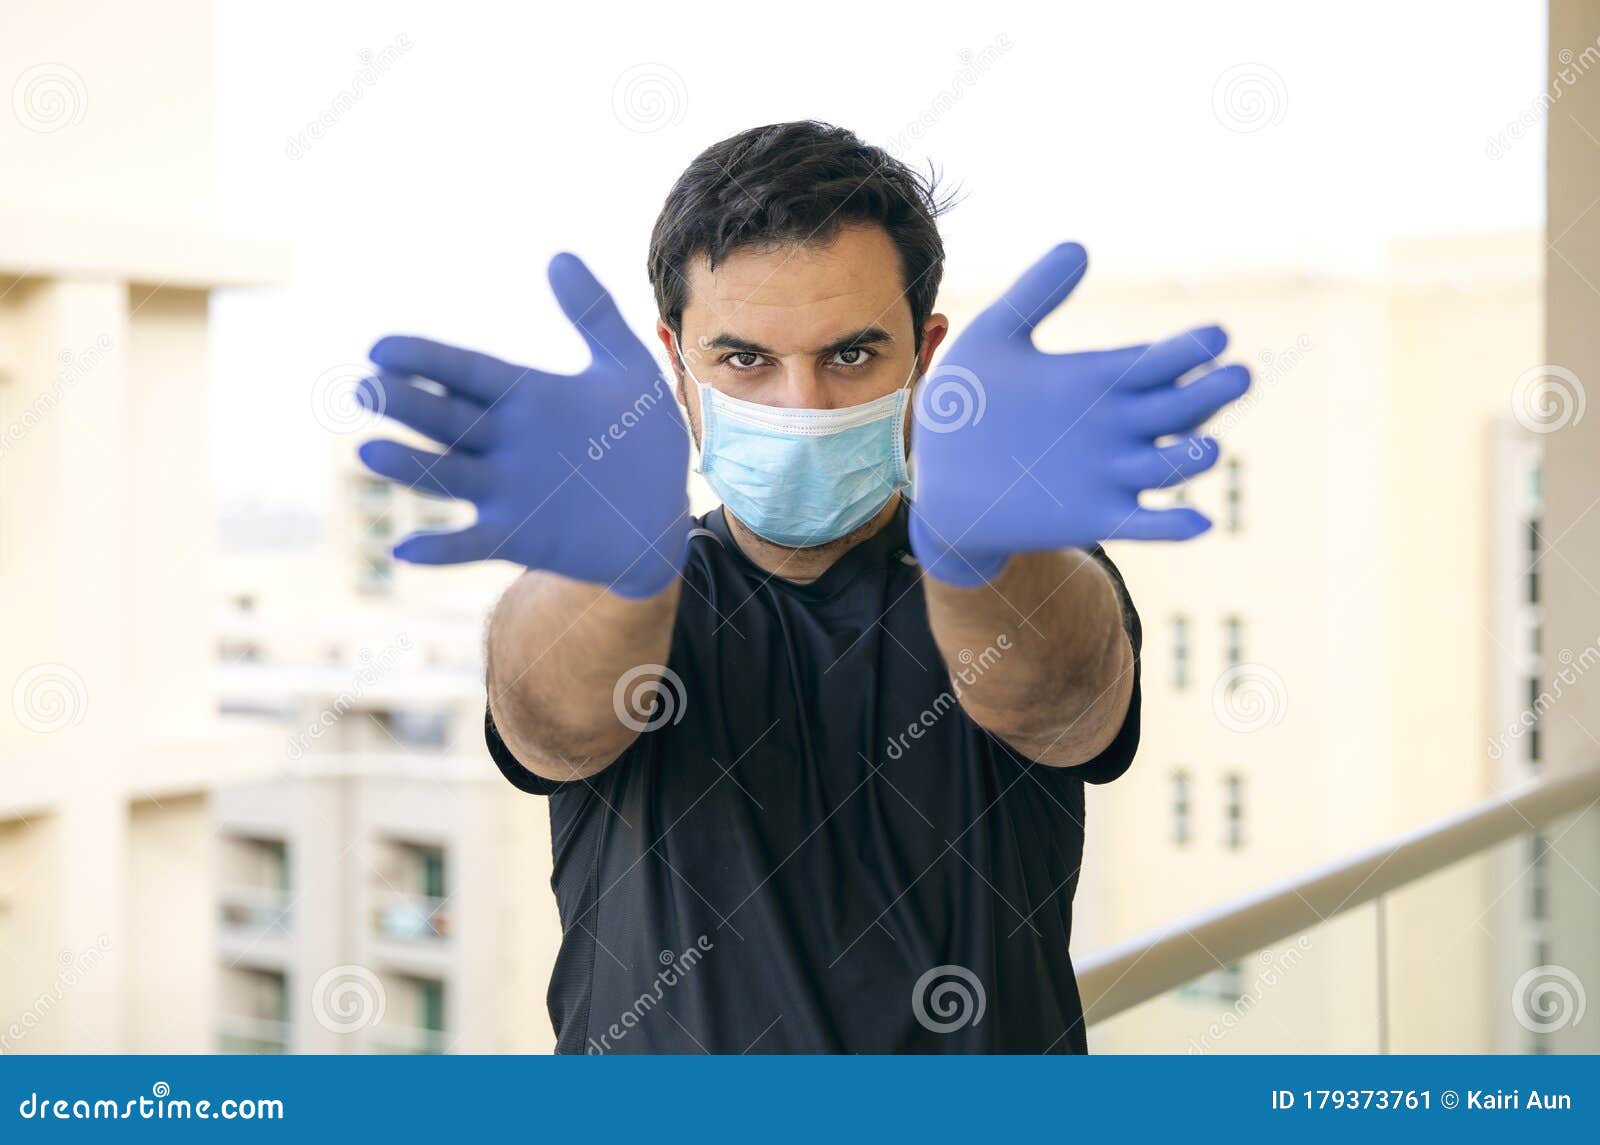 Arab Man Wearing Mask and Rubber Gloves during Pandemic Stock Image - Image  of gloves, dubai: 179373761